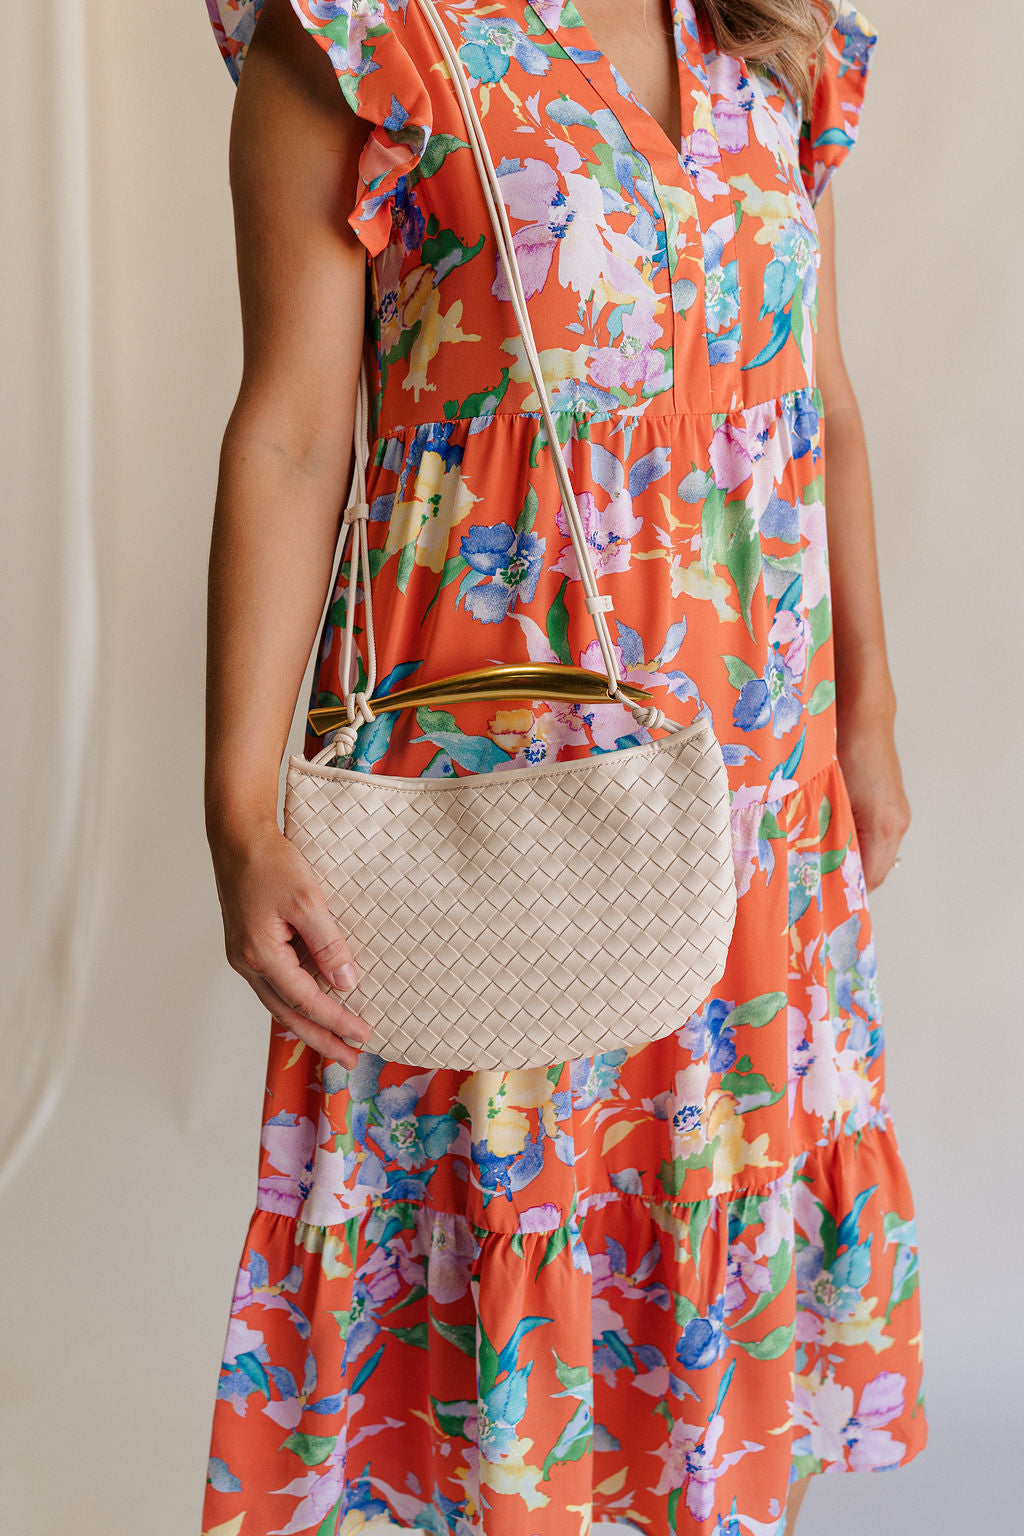 Model is wearing the Nadia Woven Purse on her shoulder. It features a cream woven body topped with a gold bar accent and cream straps.